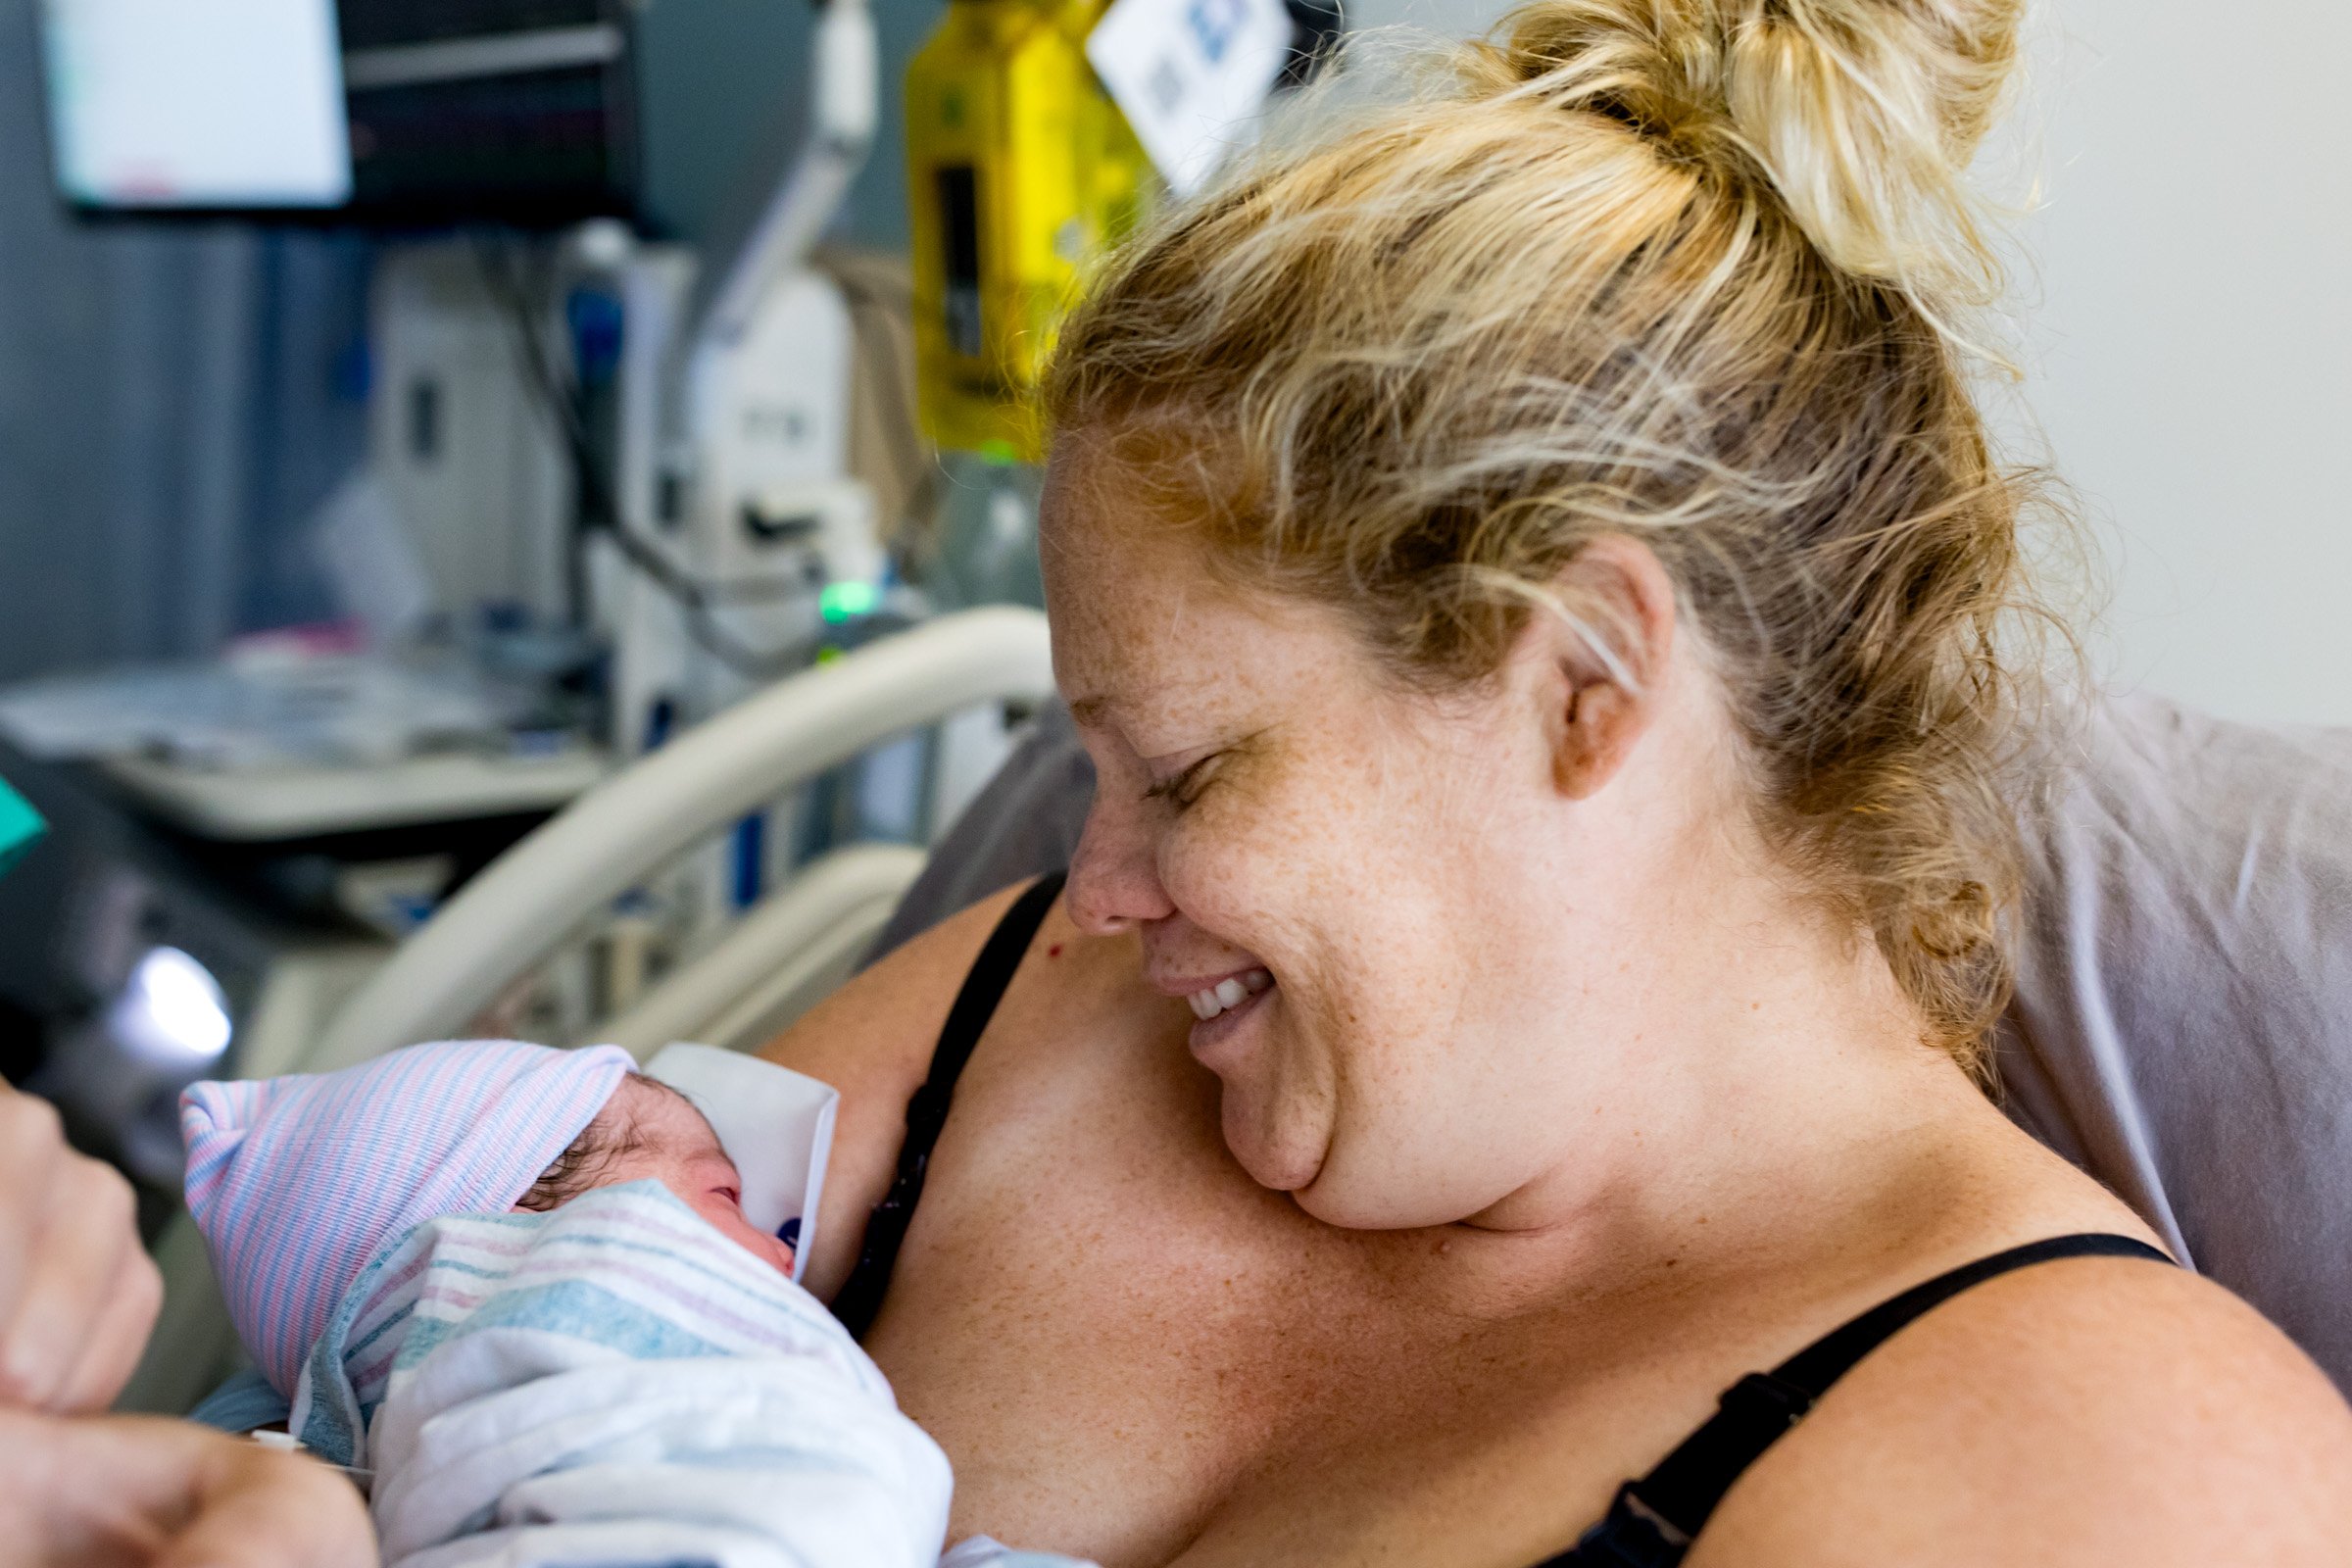 jacksonville mom smiling at her baby just after birth